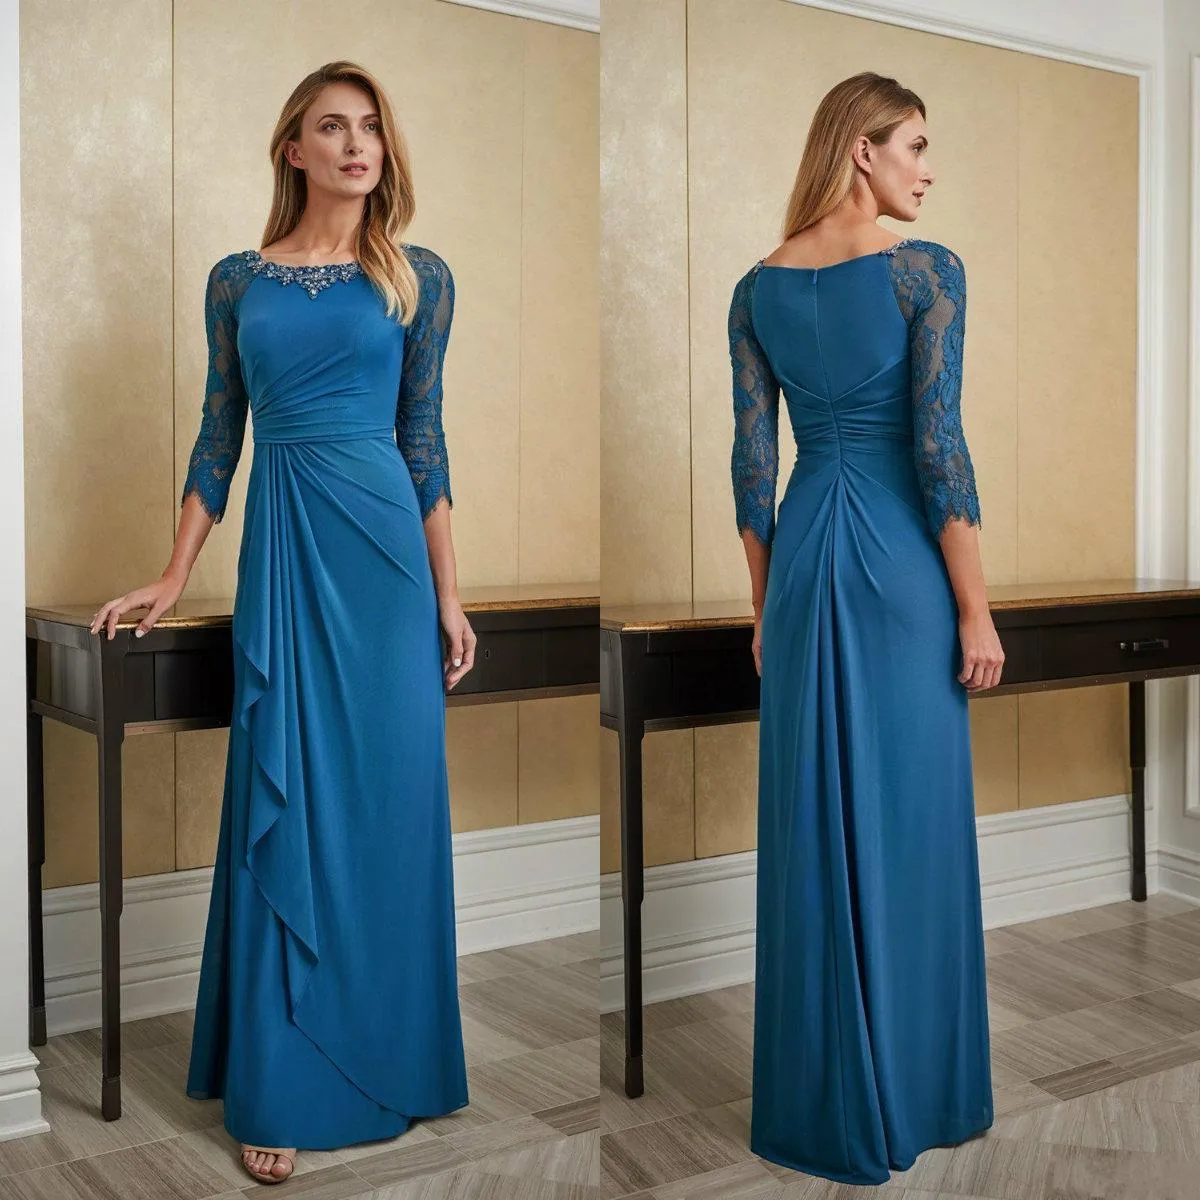 Teal Blue Mother of the Bride Dresses for Wedding 3/4 Long Sleeve Evening Gowns Pleated Crystals Lace Beads Chiffon Wedding Guest Dress